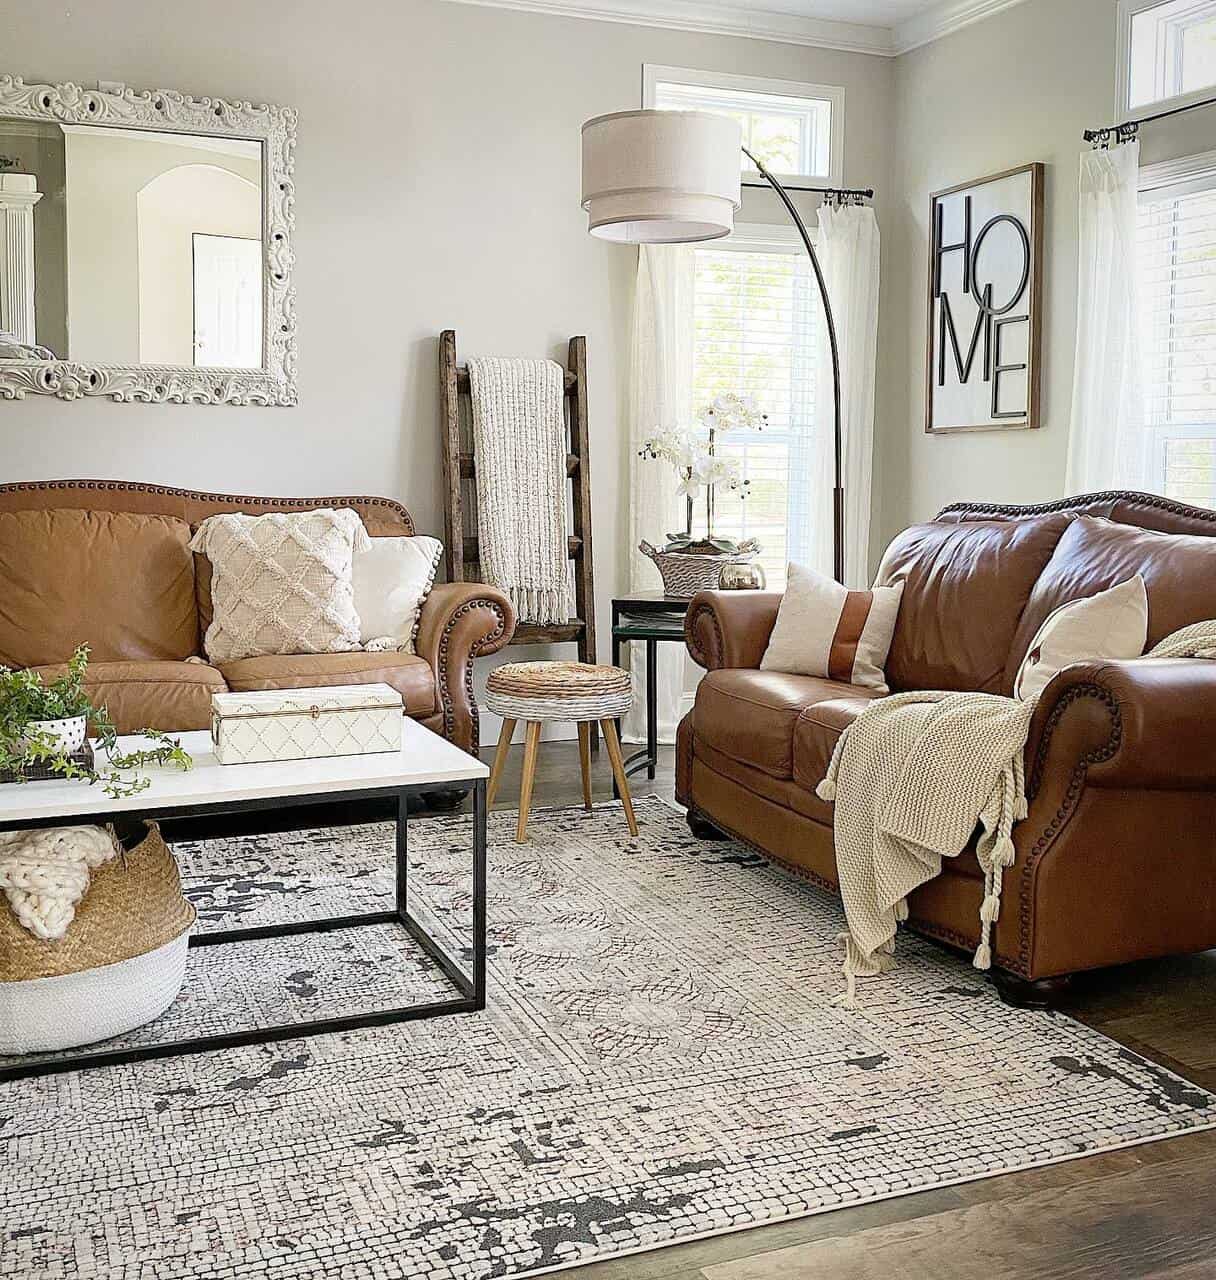 What's the Best Rug Size for the Living Room - 14 Ideas